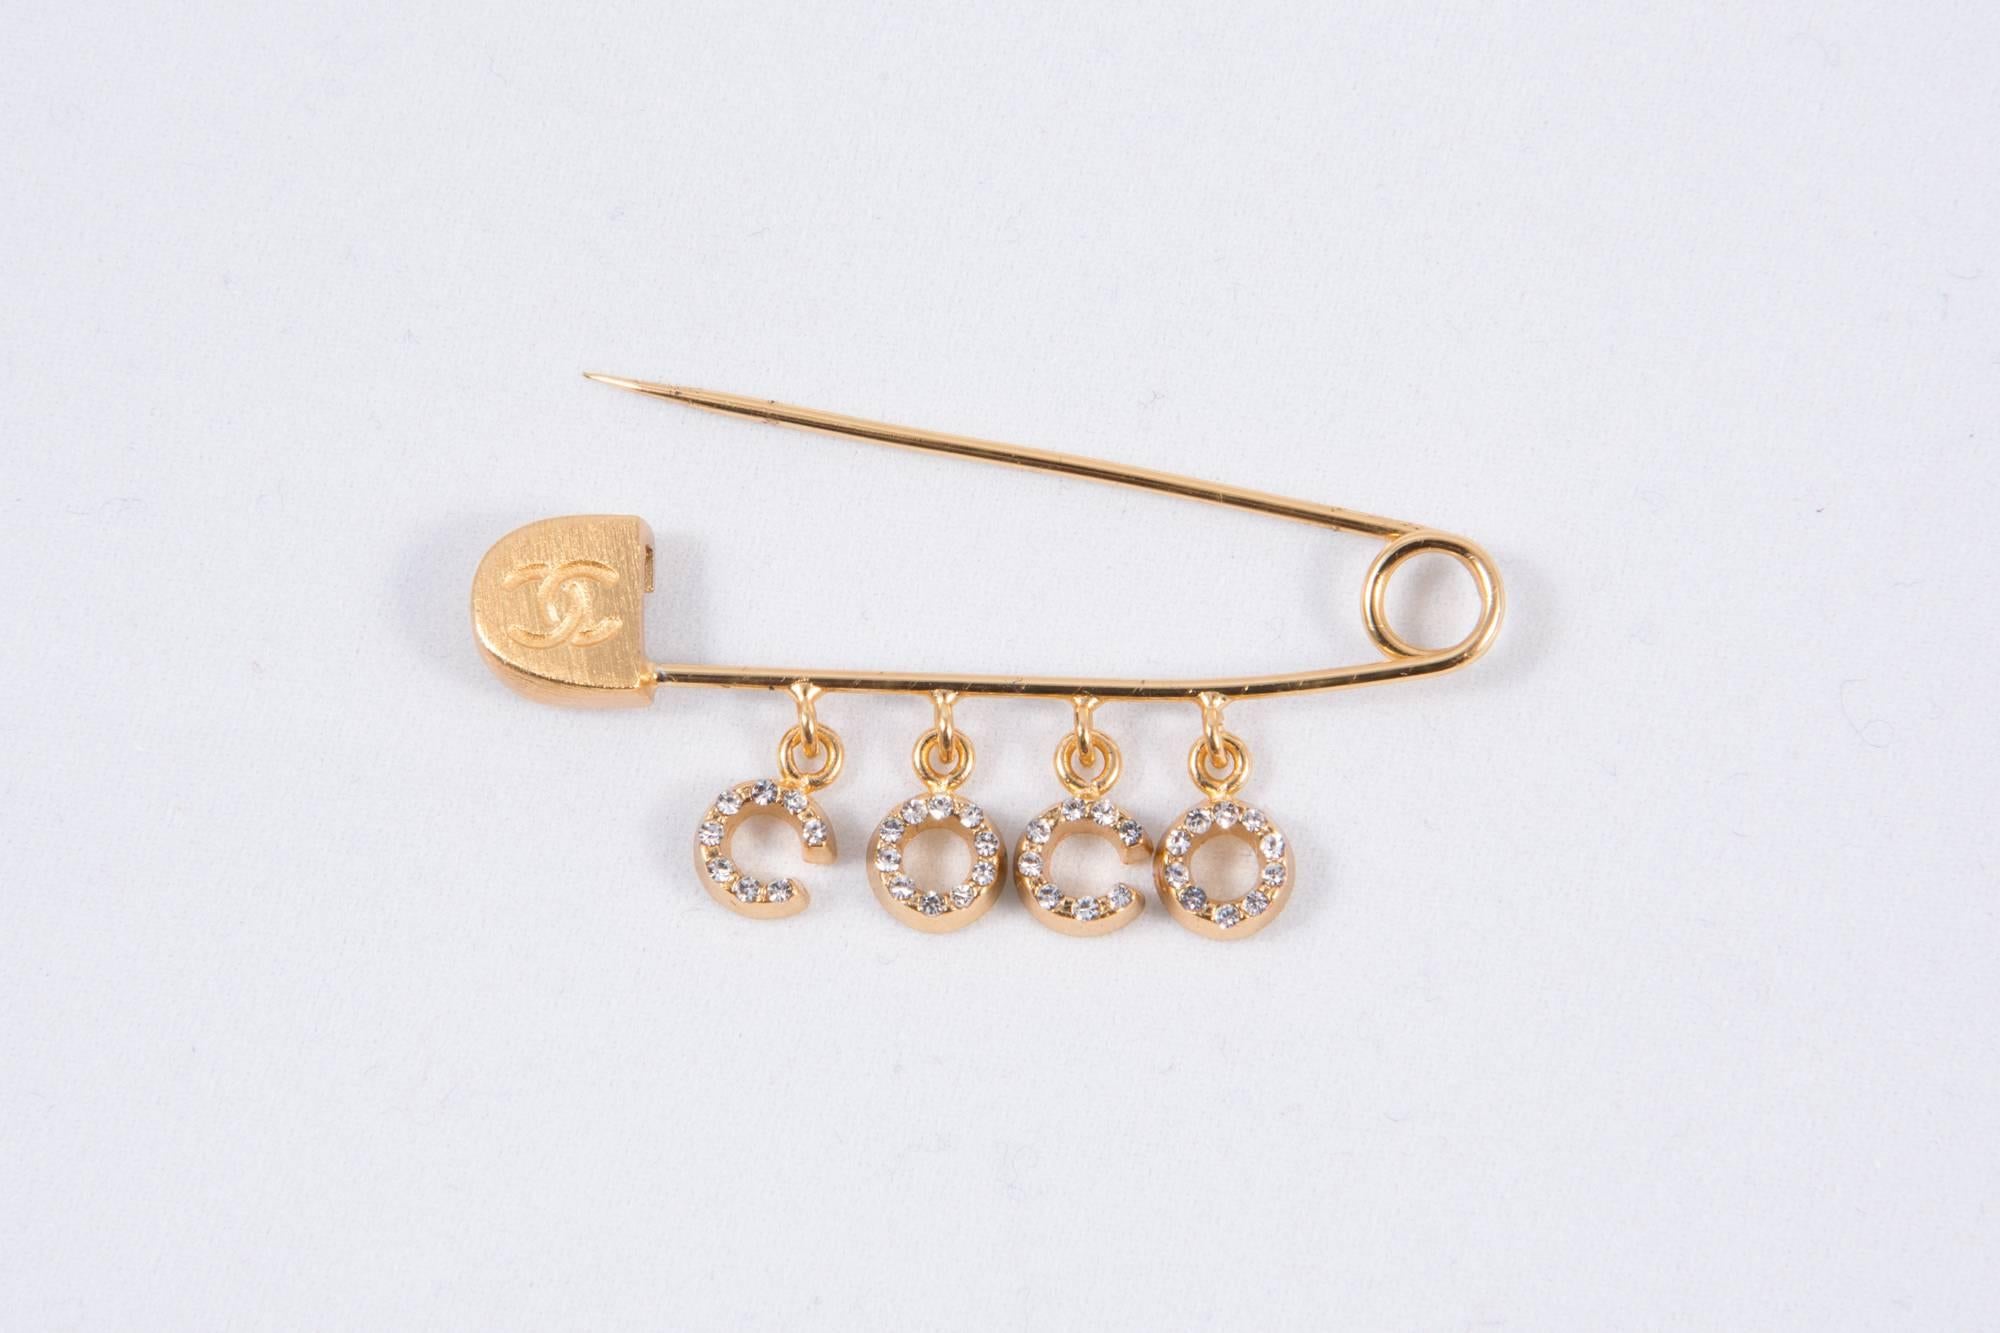  2001s Chanel Coco crystal strass & gold tone brooch featuring a safety pin shape, Chanel signature engraved on the reverse of the pin. 
A beautifully and practical brooch for securing a scarf, sweater or on a suit.
Length:1,9 in. (5cm) X 0,8in.